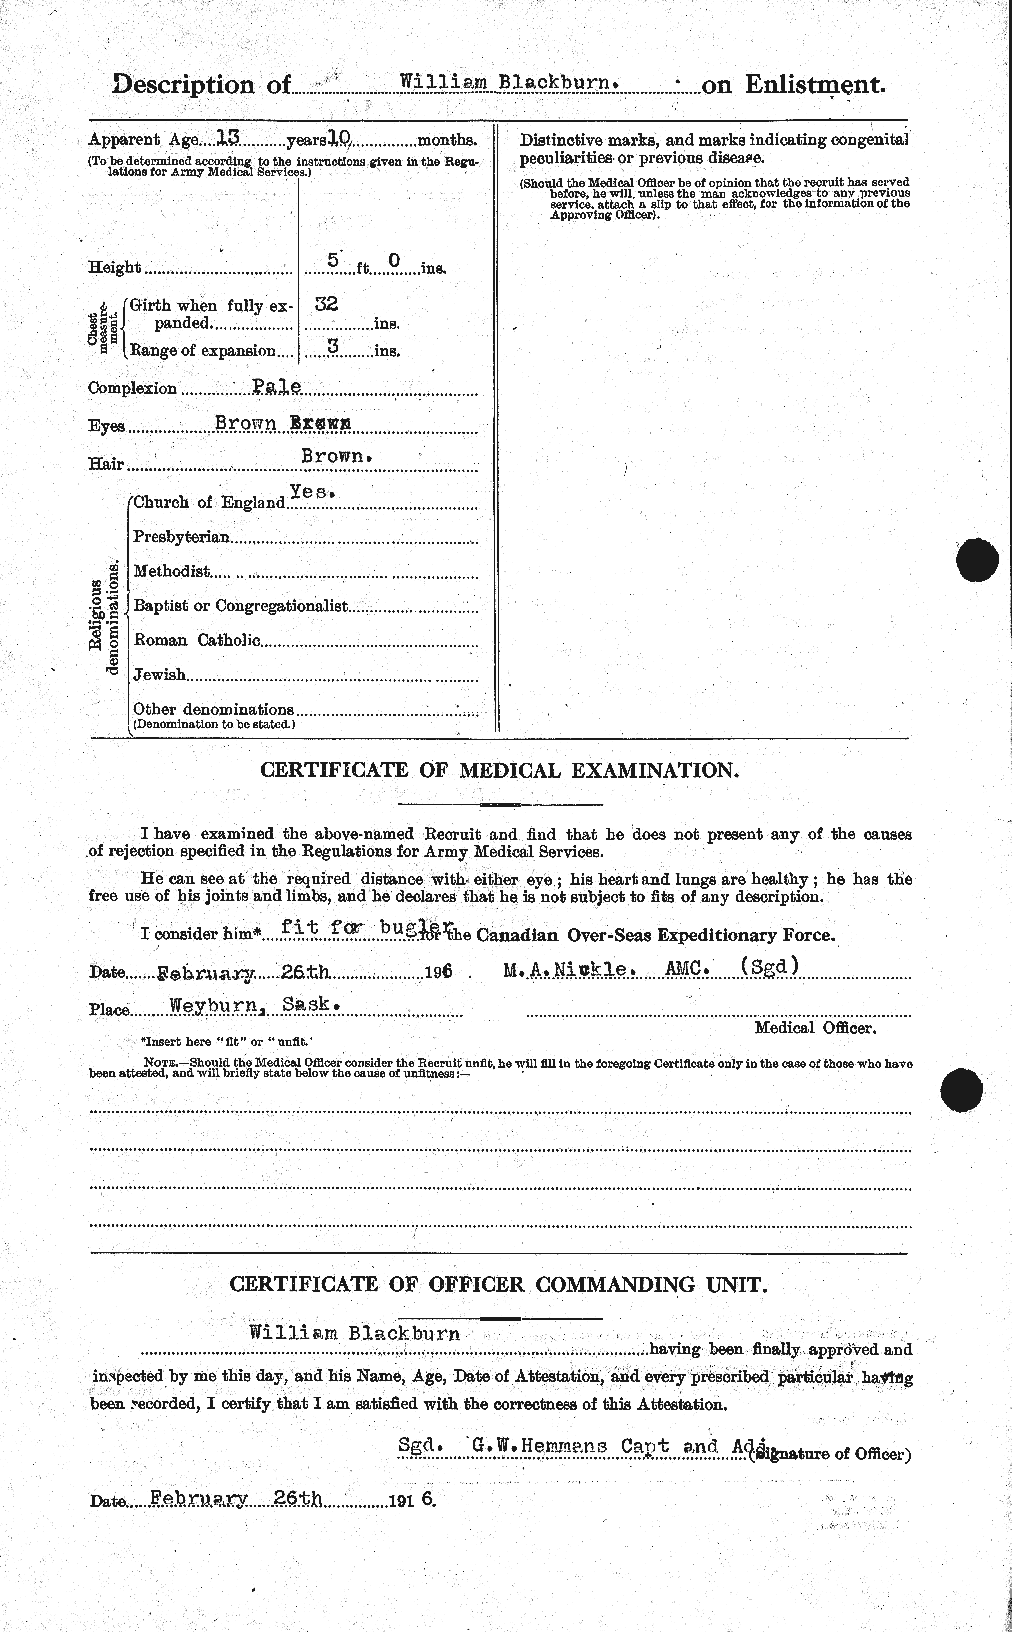 Personnel Records of the First World War - CEF 246427b